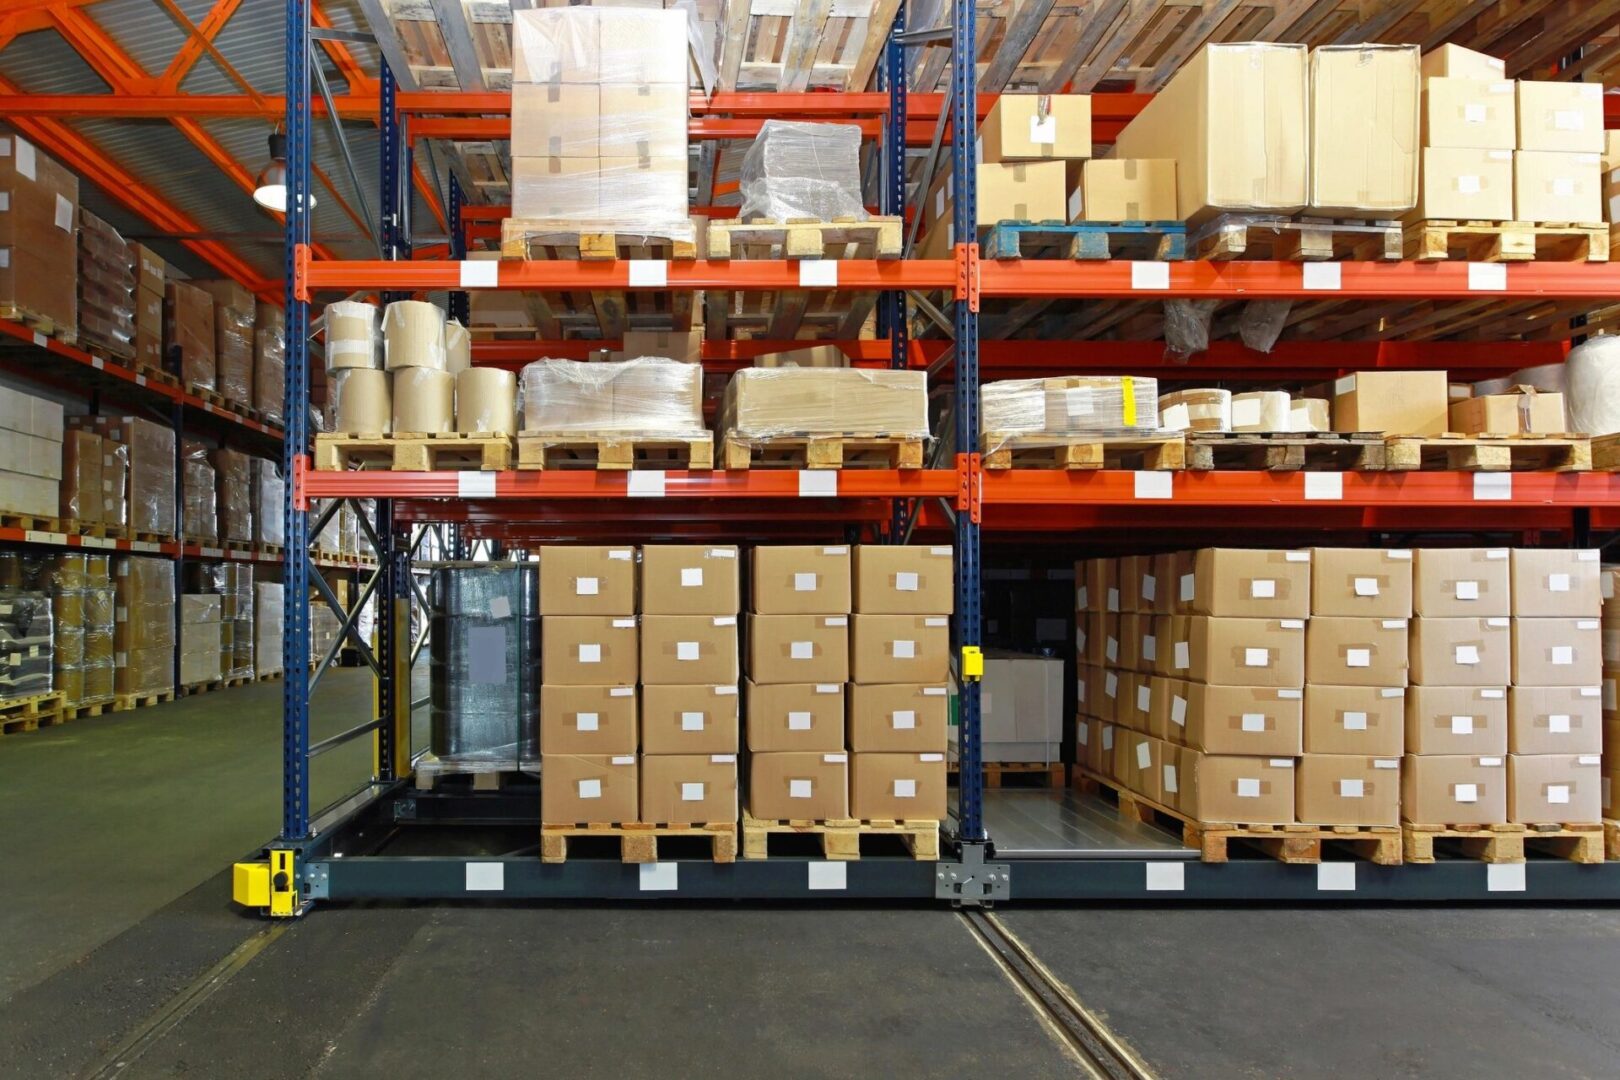 A warehouse with boxes and other items on the shelves.